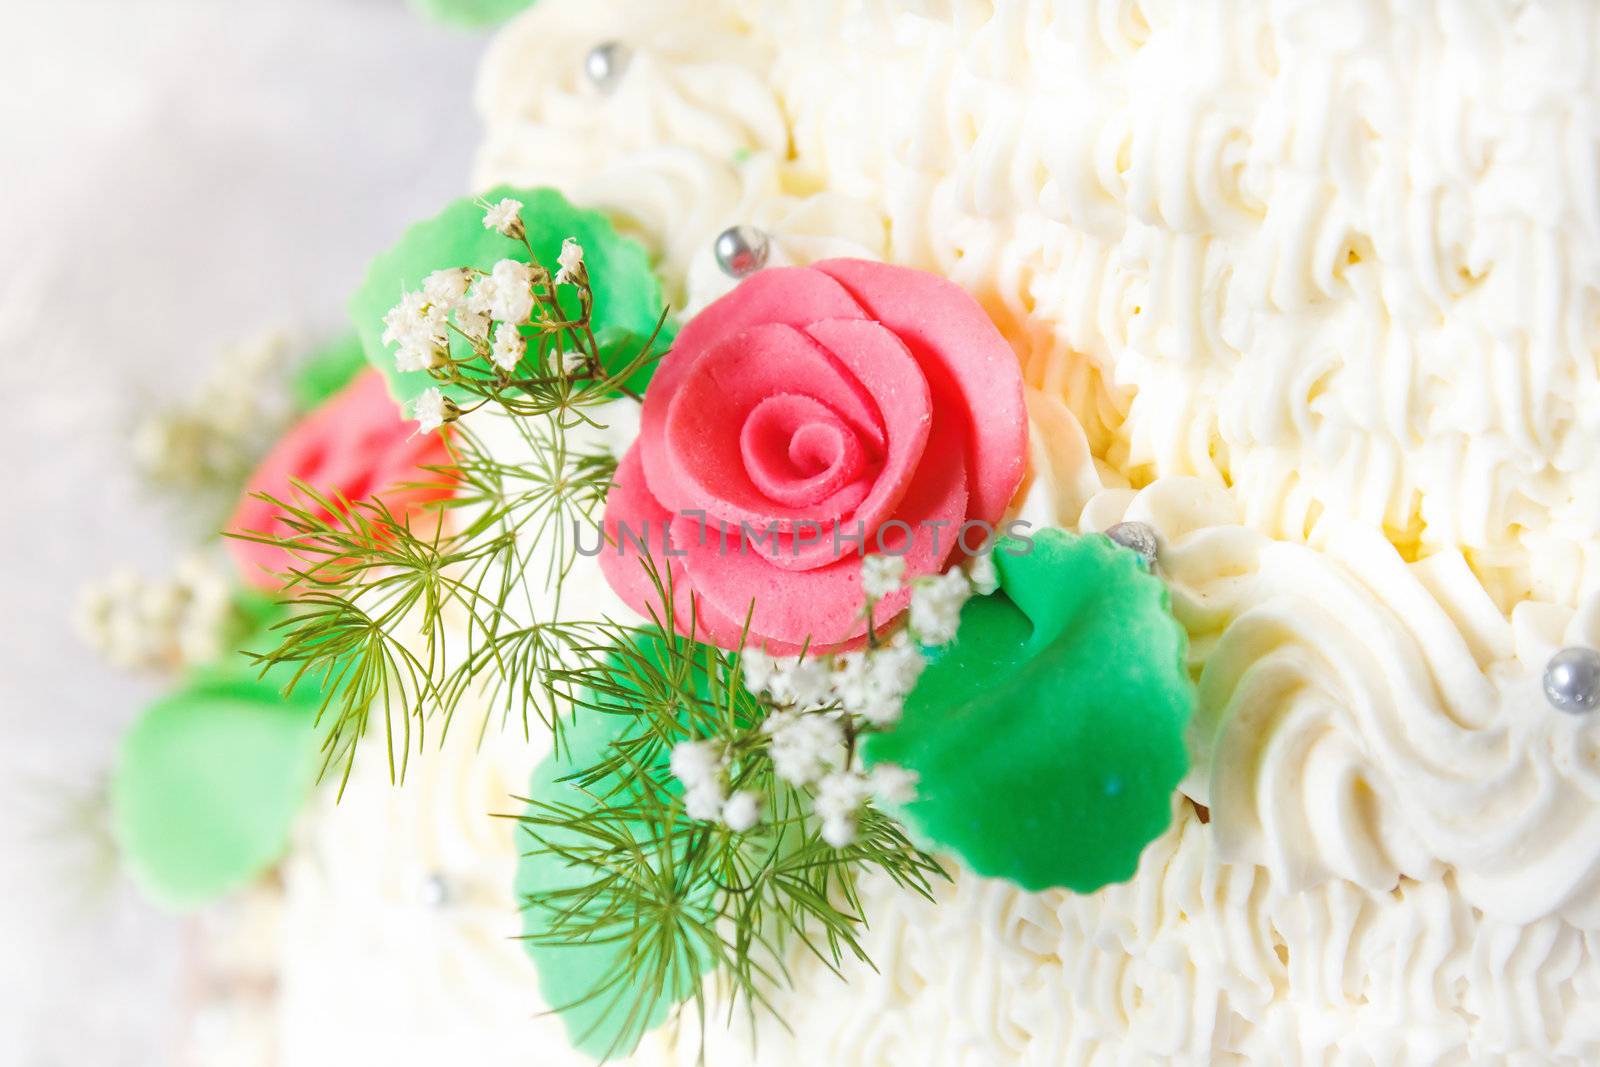 Detail of traditional wedding cake with cream roses